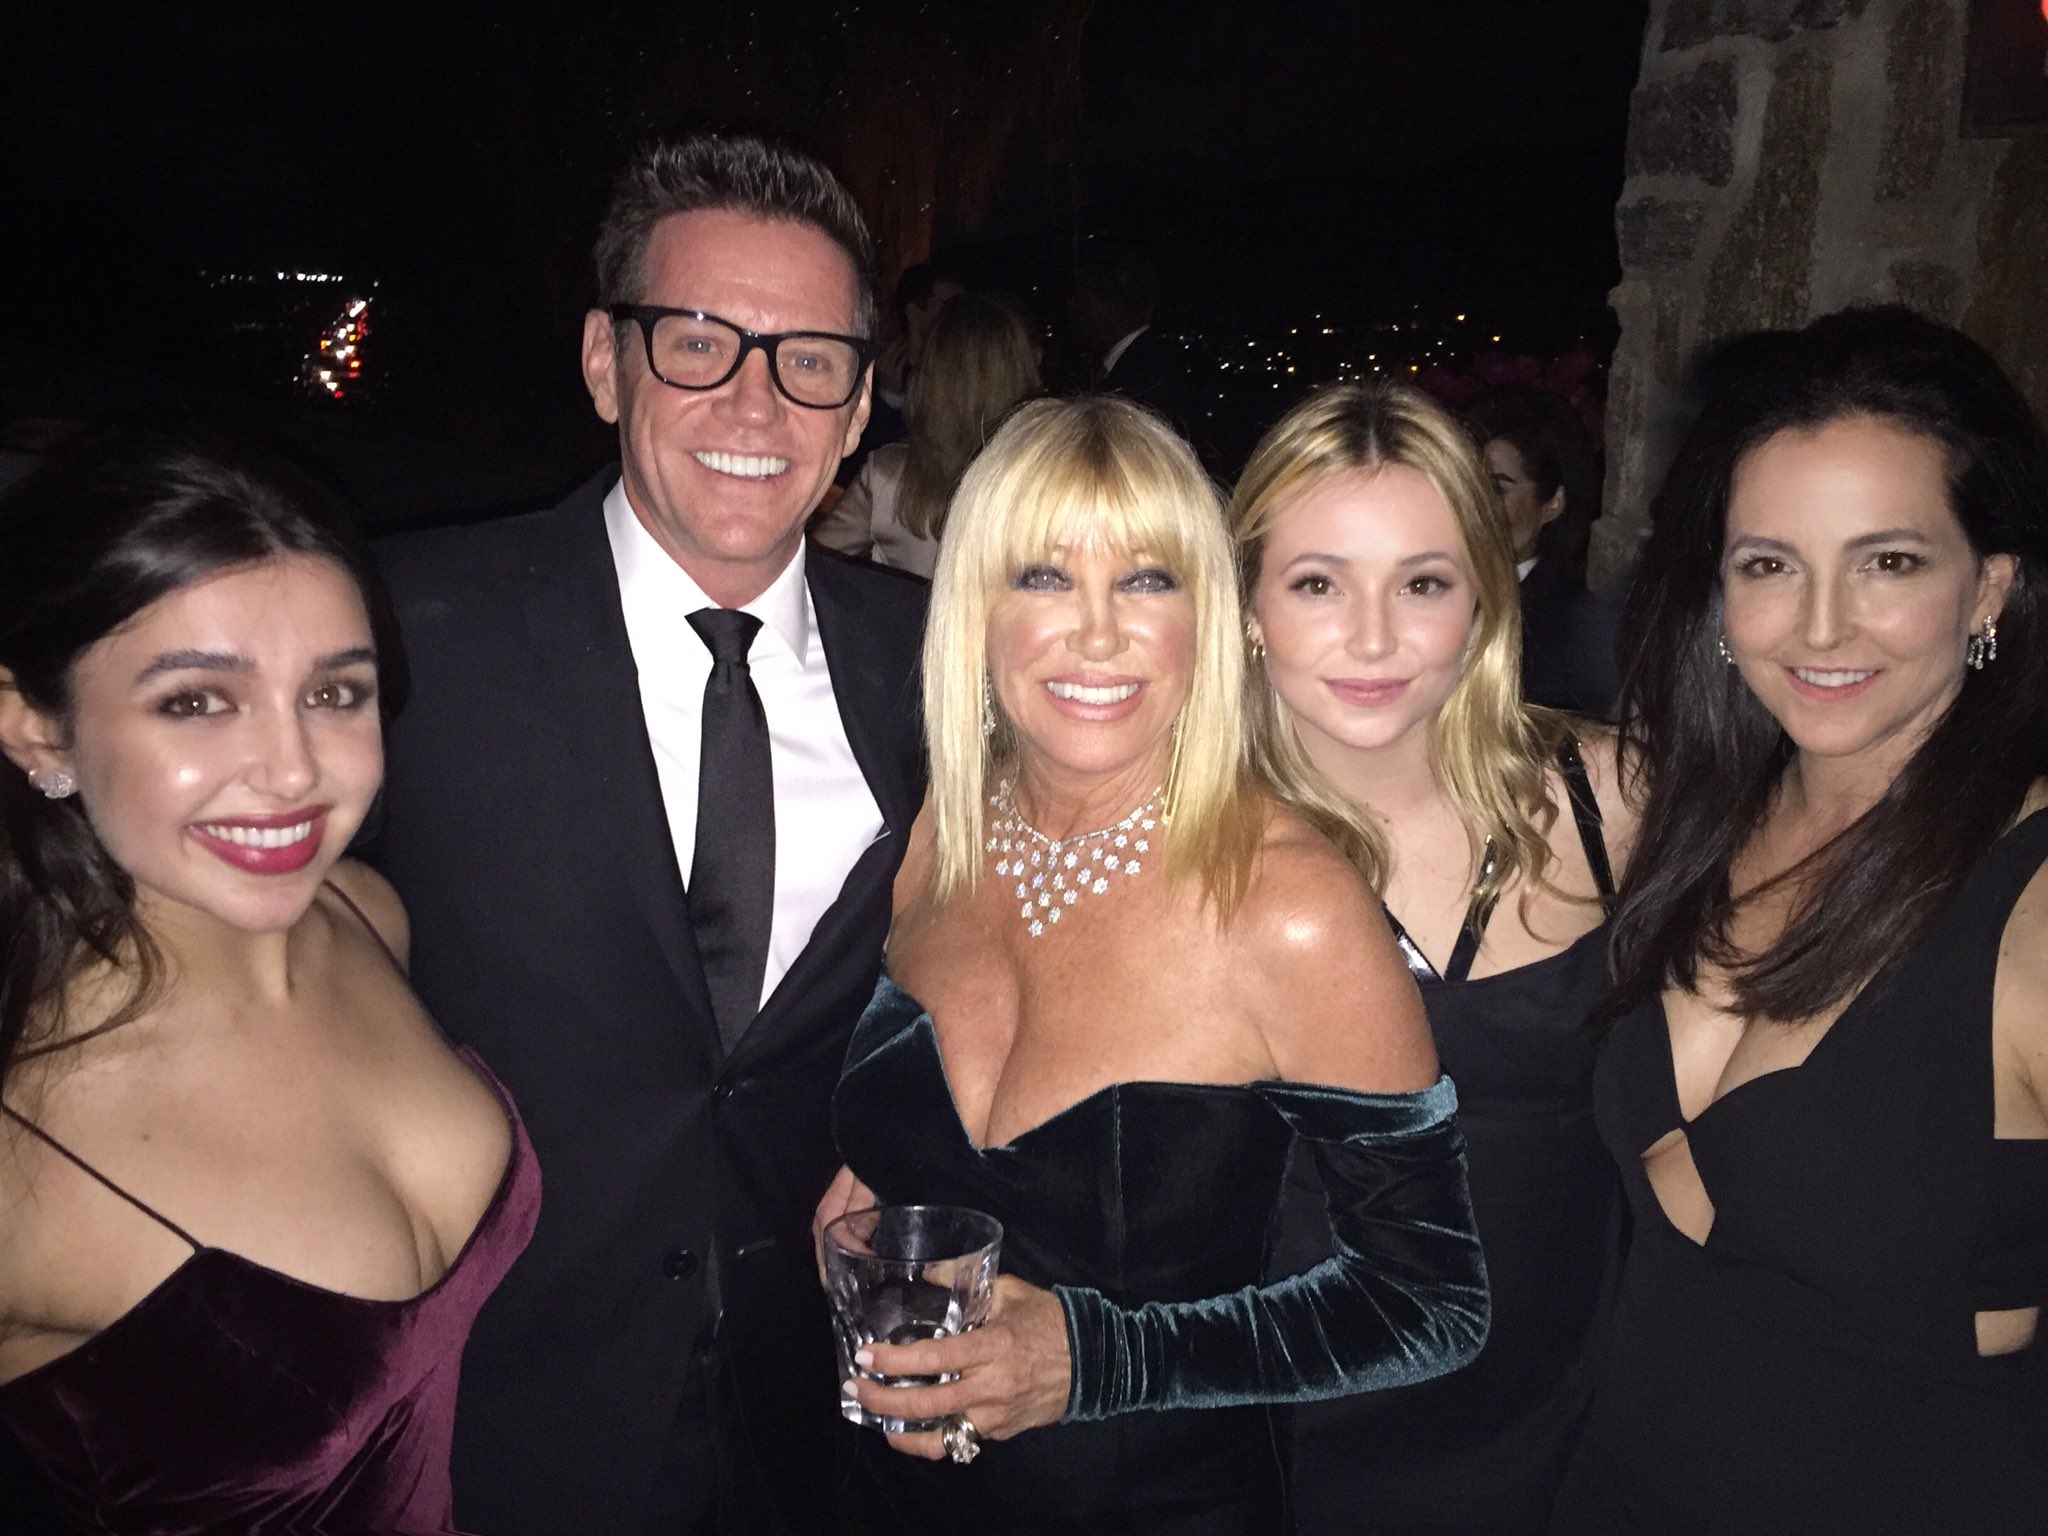 Suzanne Somers on X: "Wonderful family celebration over the weekend!! https://t.co/abAyBimuwL https://t.co/WqkSwKSlVi" / X